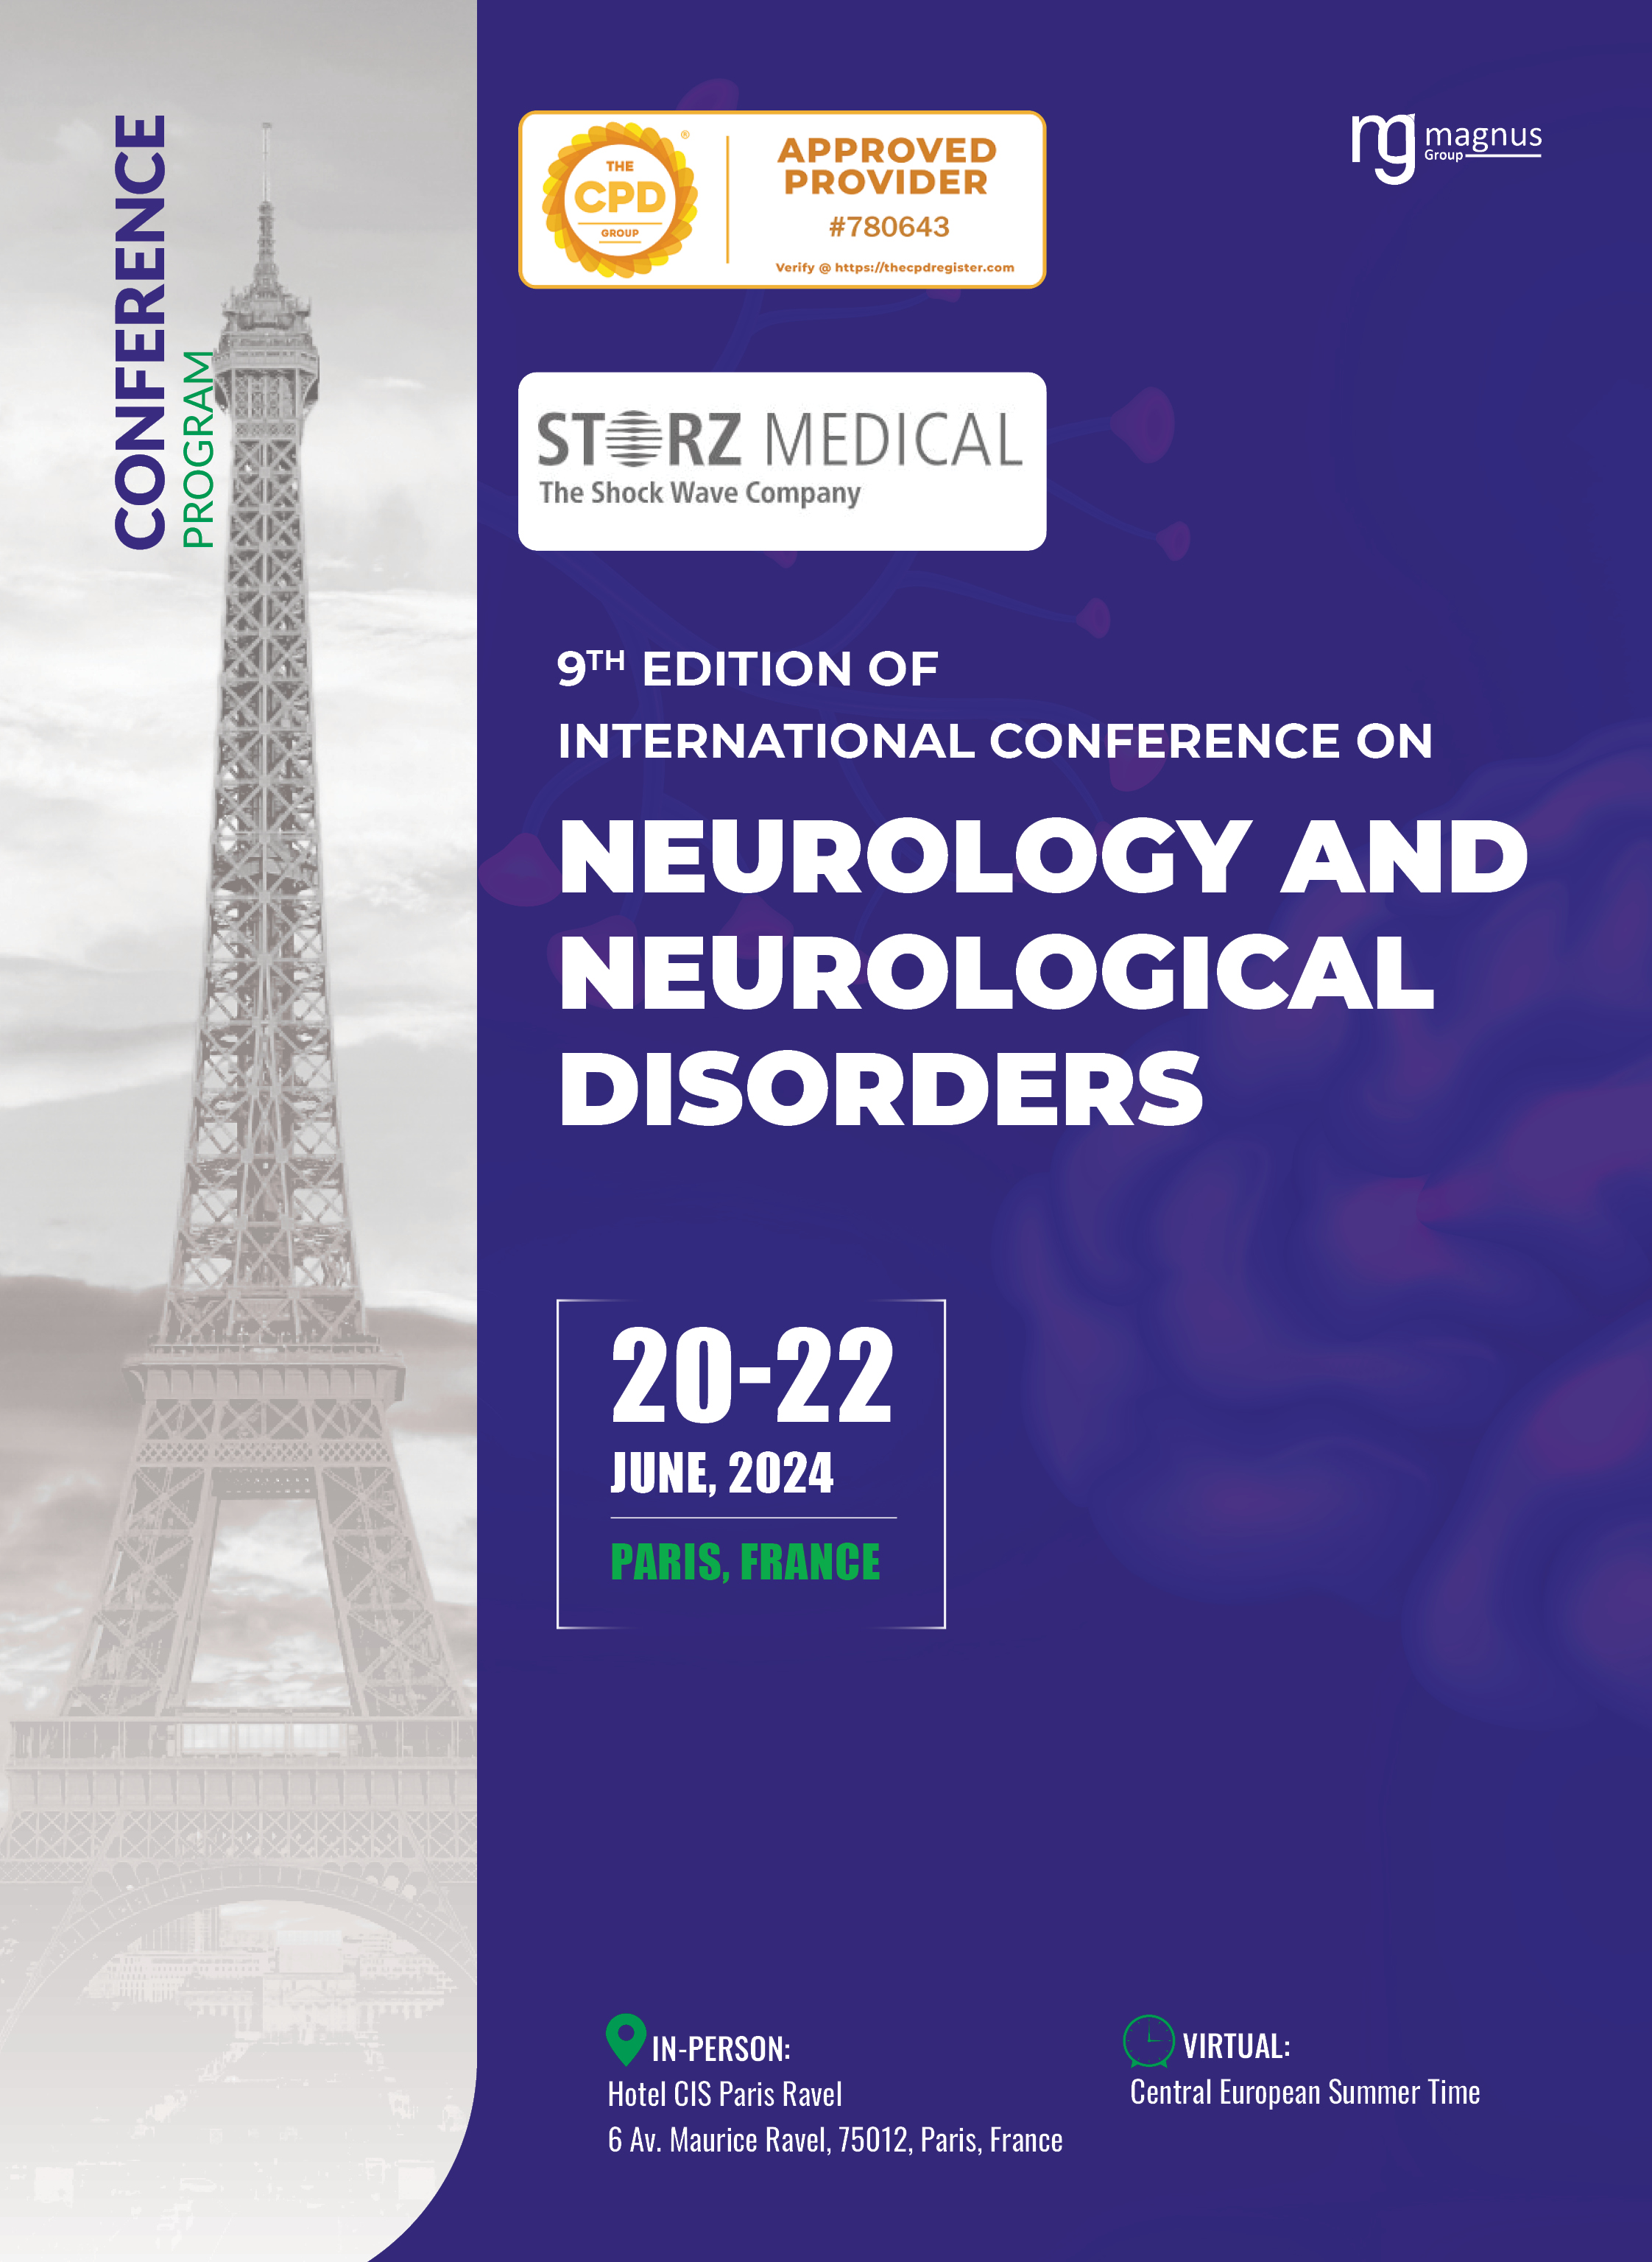 9th Edition of International Conference on Neurology and Neurological Disorders | Paris, France Program